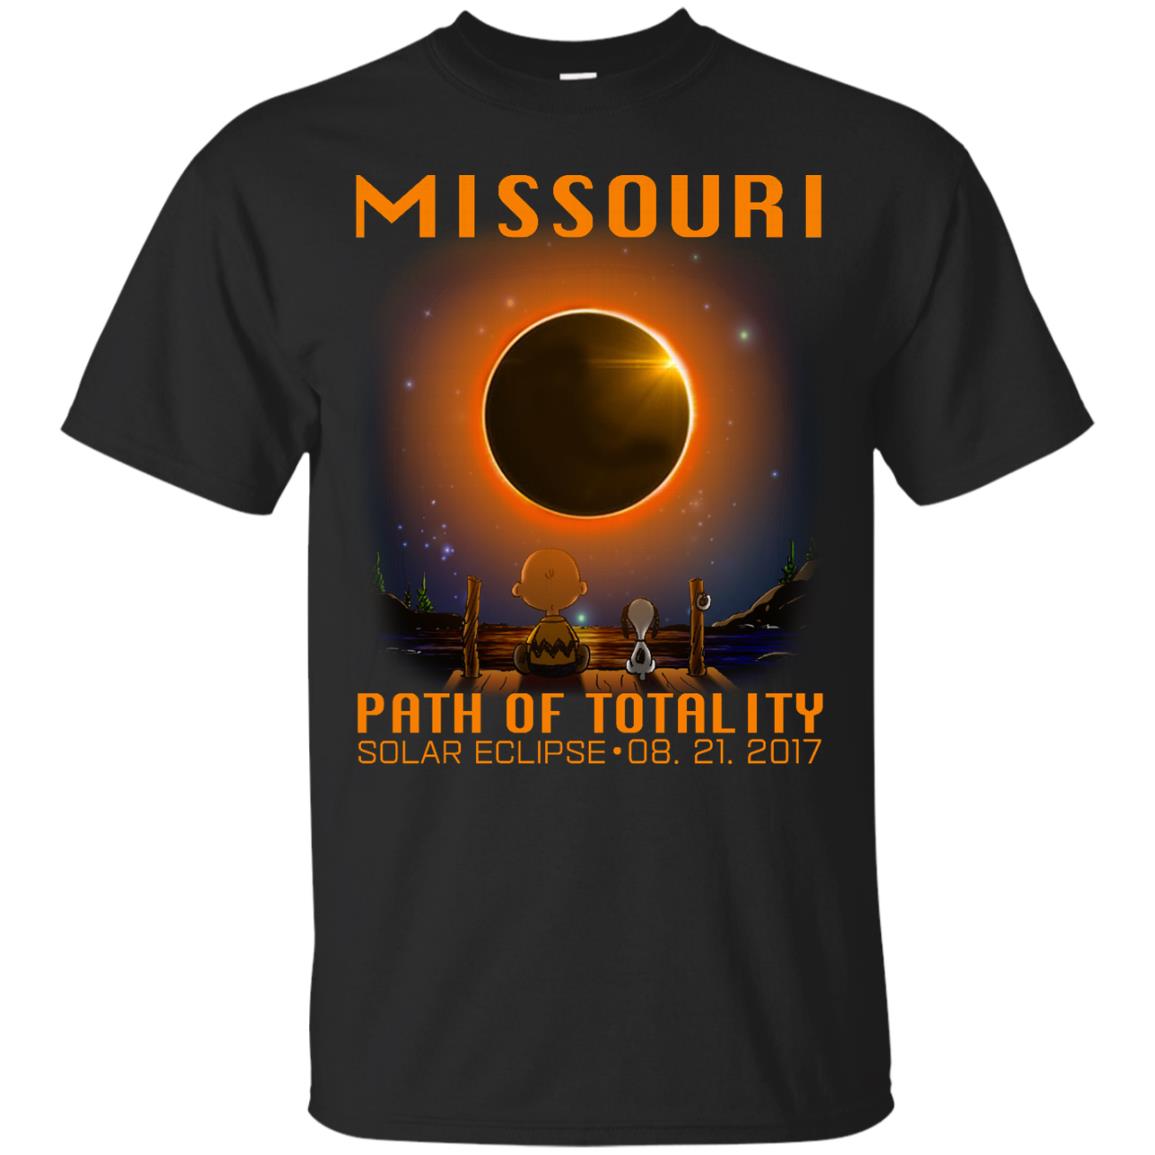 Snoopy and Charlie Brown - Missouri - Path of totality solar eclipse shirt